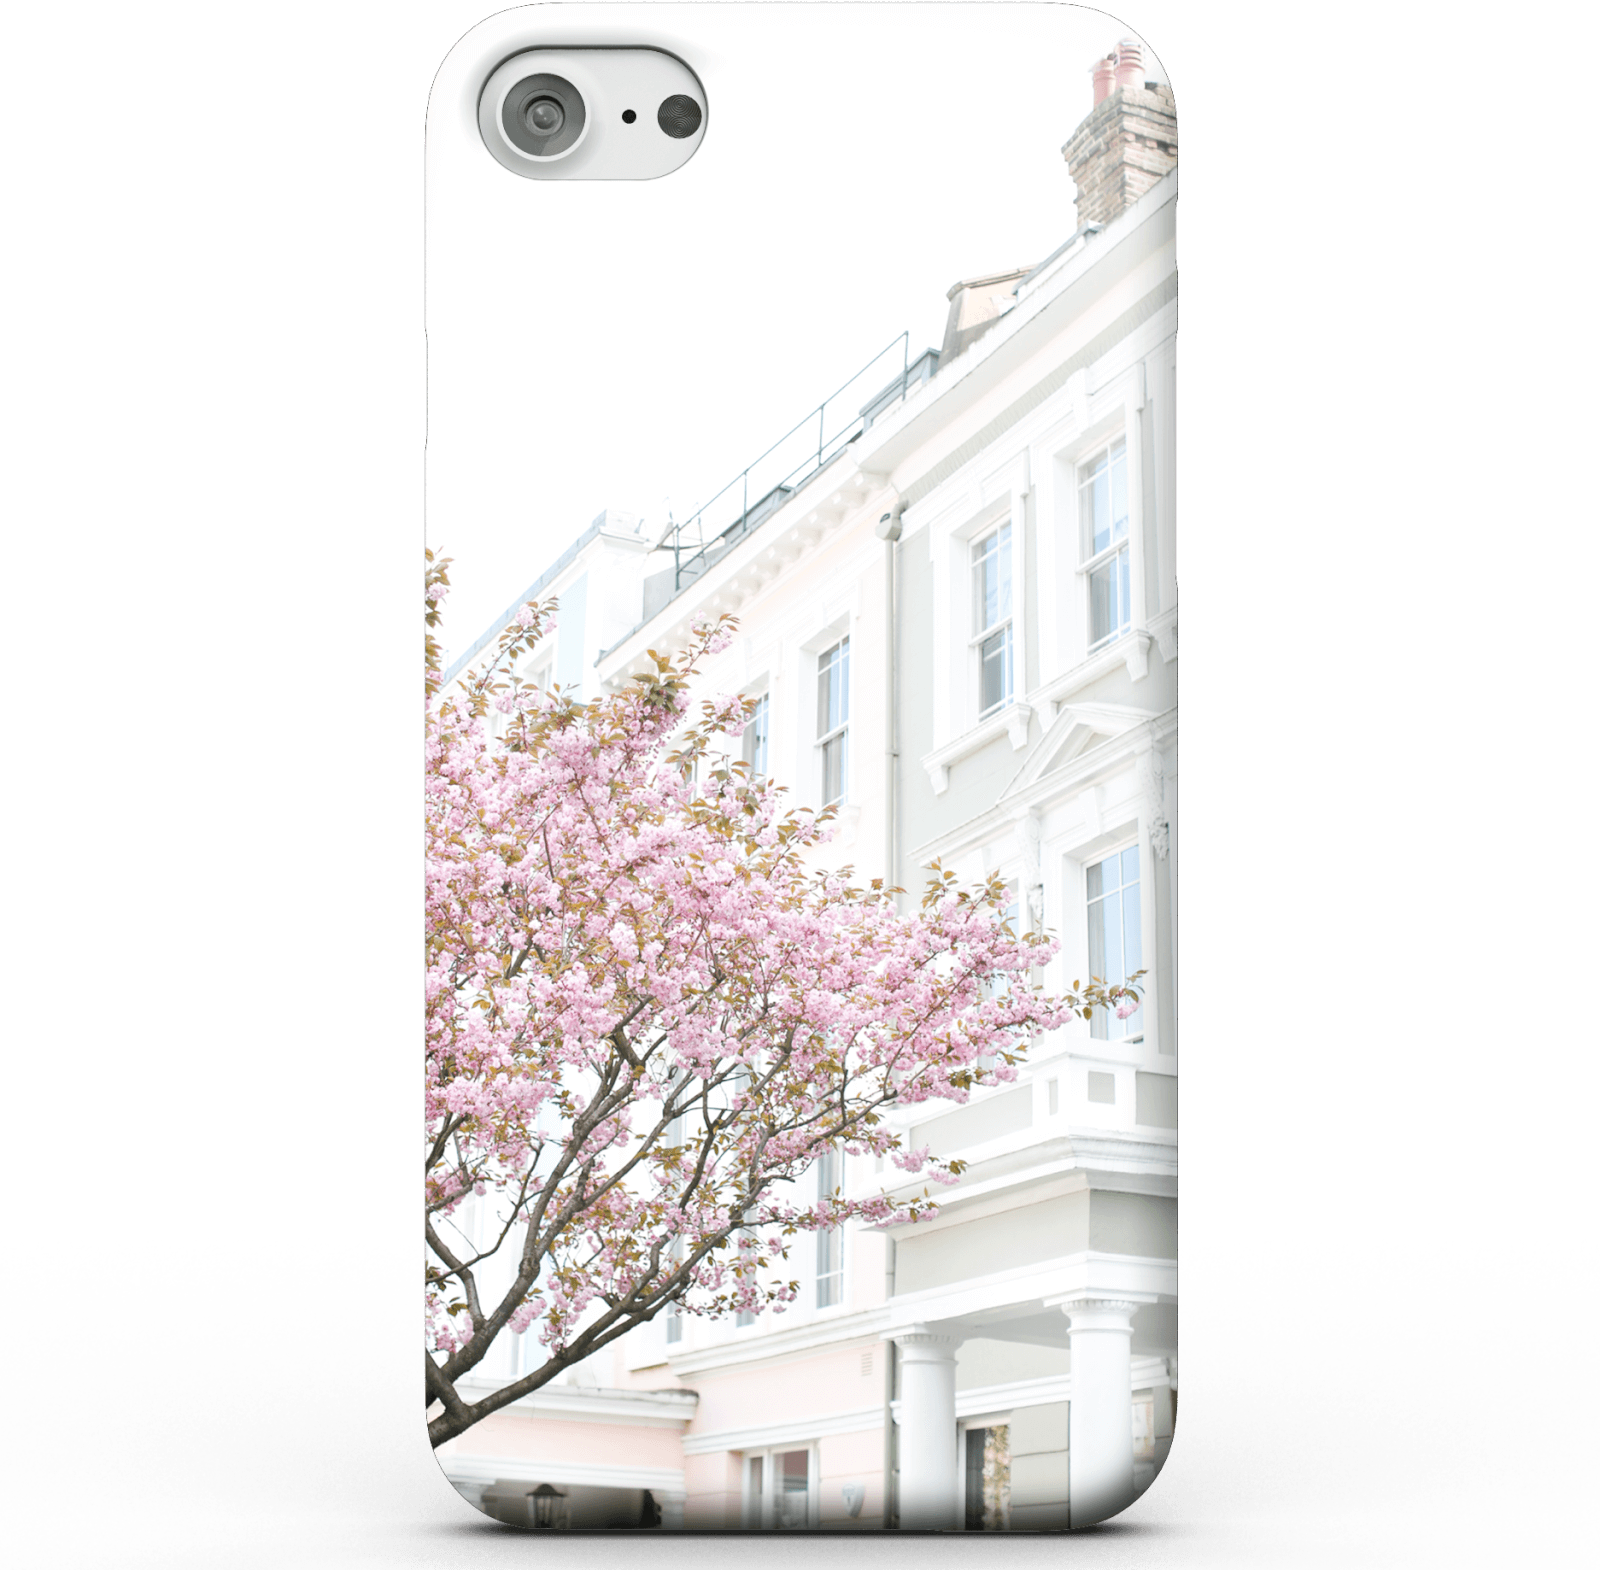 Blossom Outside My Window Phone Case for iPhone and Android - iPhone 5/5s - Snap Case - Matte